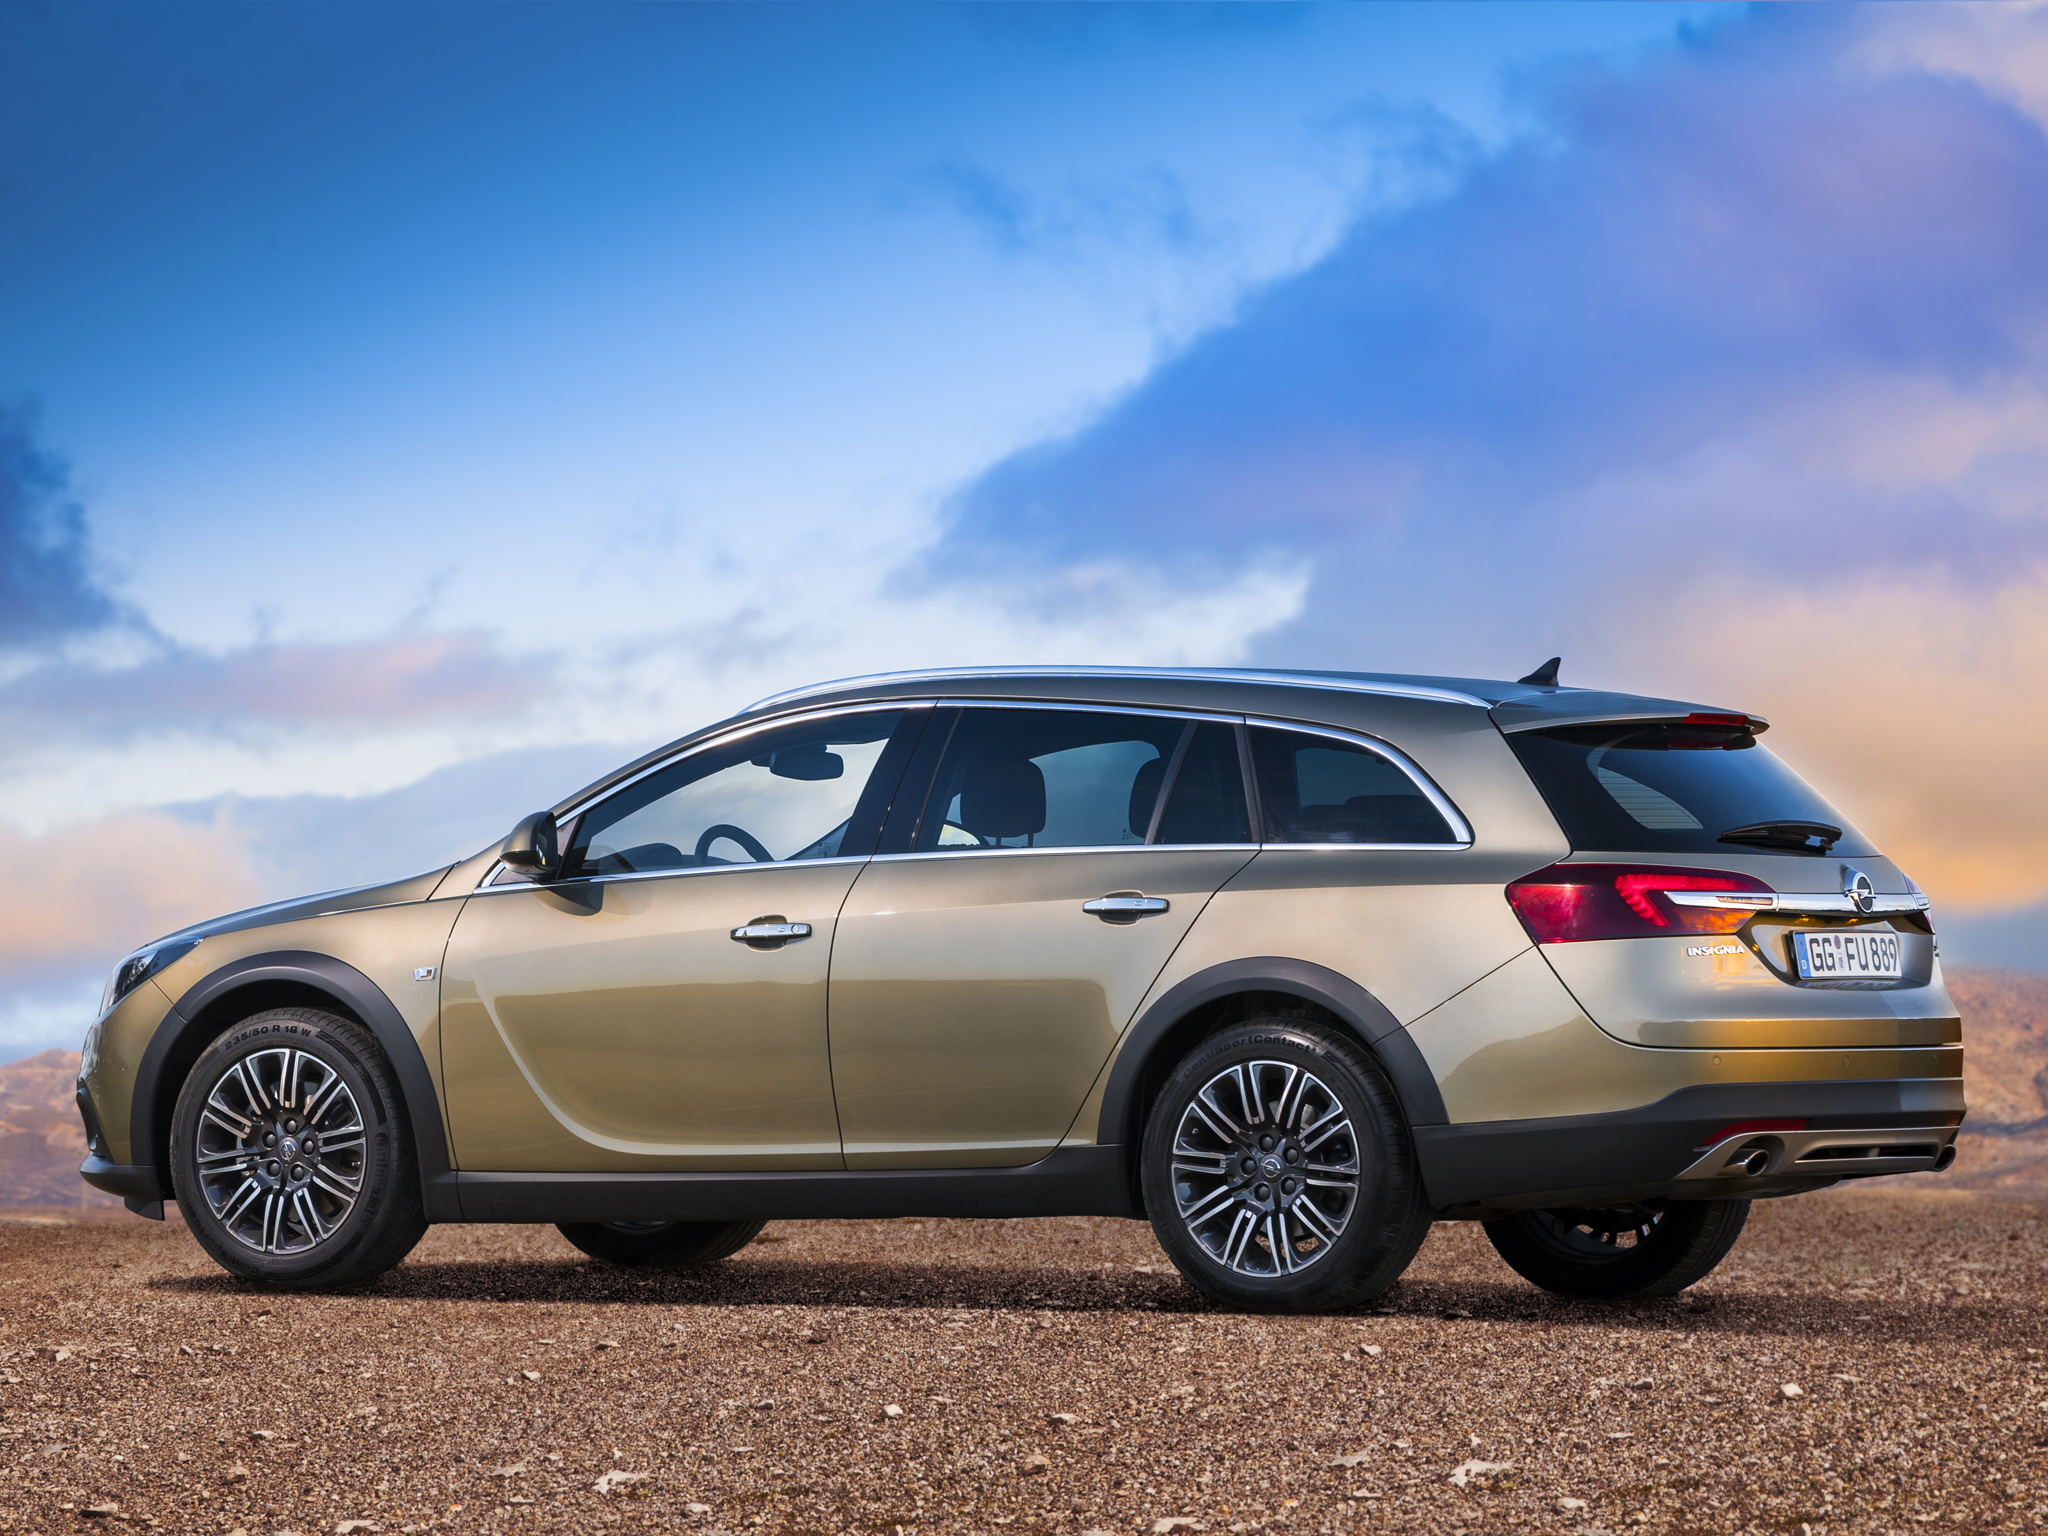 2014, Opel, Insignia, Country, Tourer, Stationwagon, Dw Wallpaper